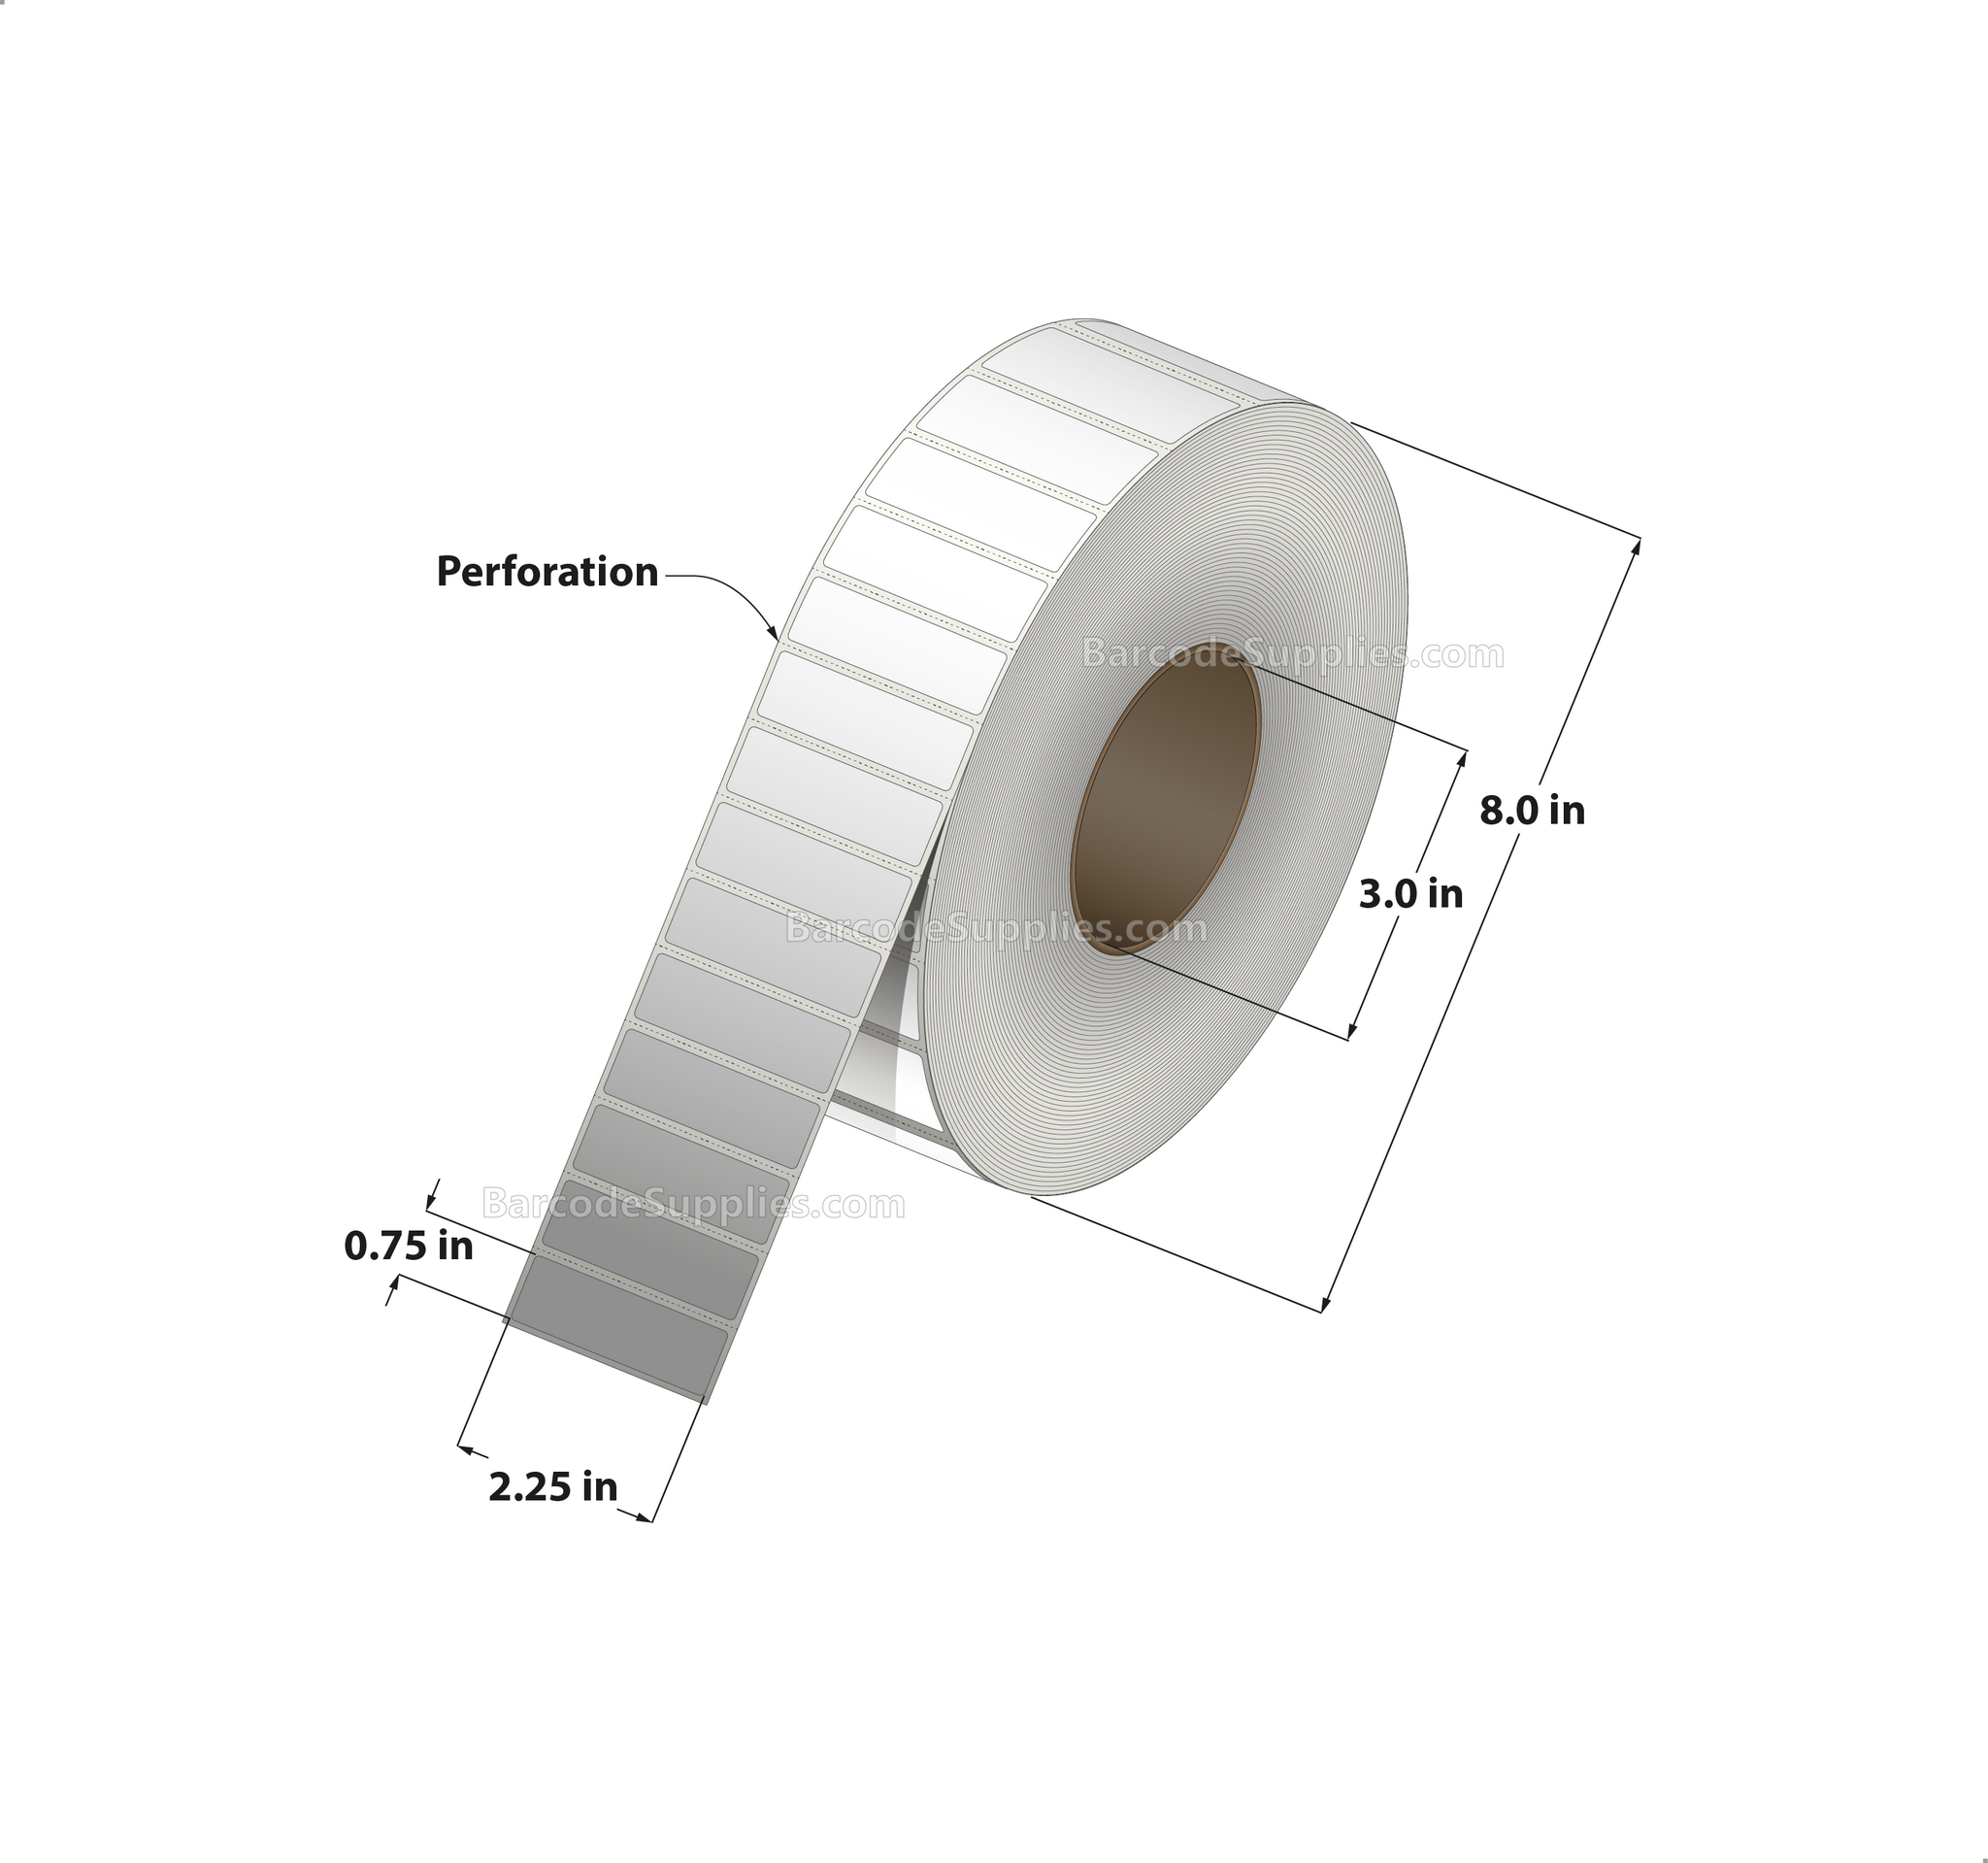 2.25 x 0.75 Thermal Transfer White Labels With Permanent Adhesive - Perforated - 7500 Labels Per Roll - Carton Of 8 Rolls - 60000 Labels Total - MPN: RT-225-075-7500-3